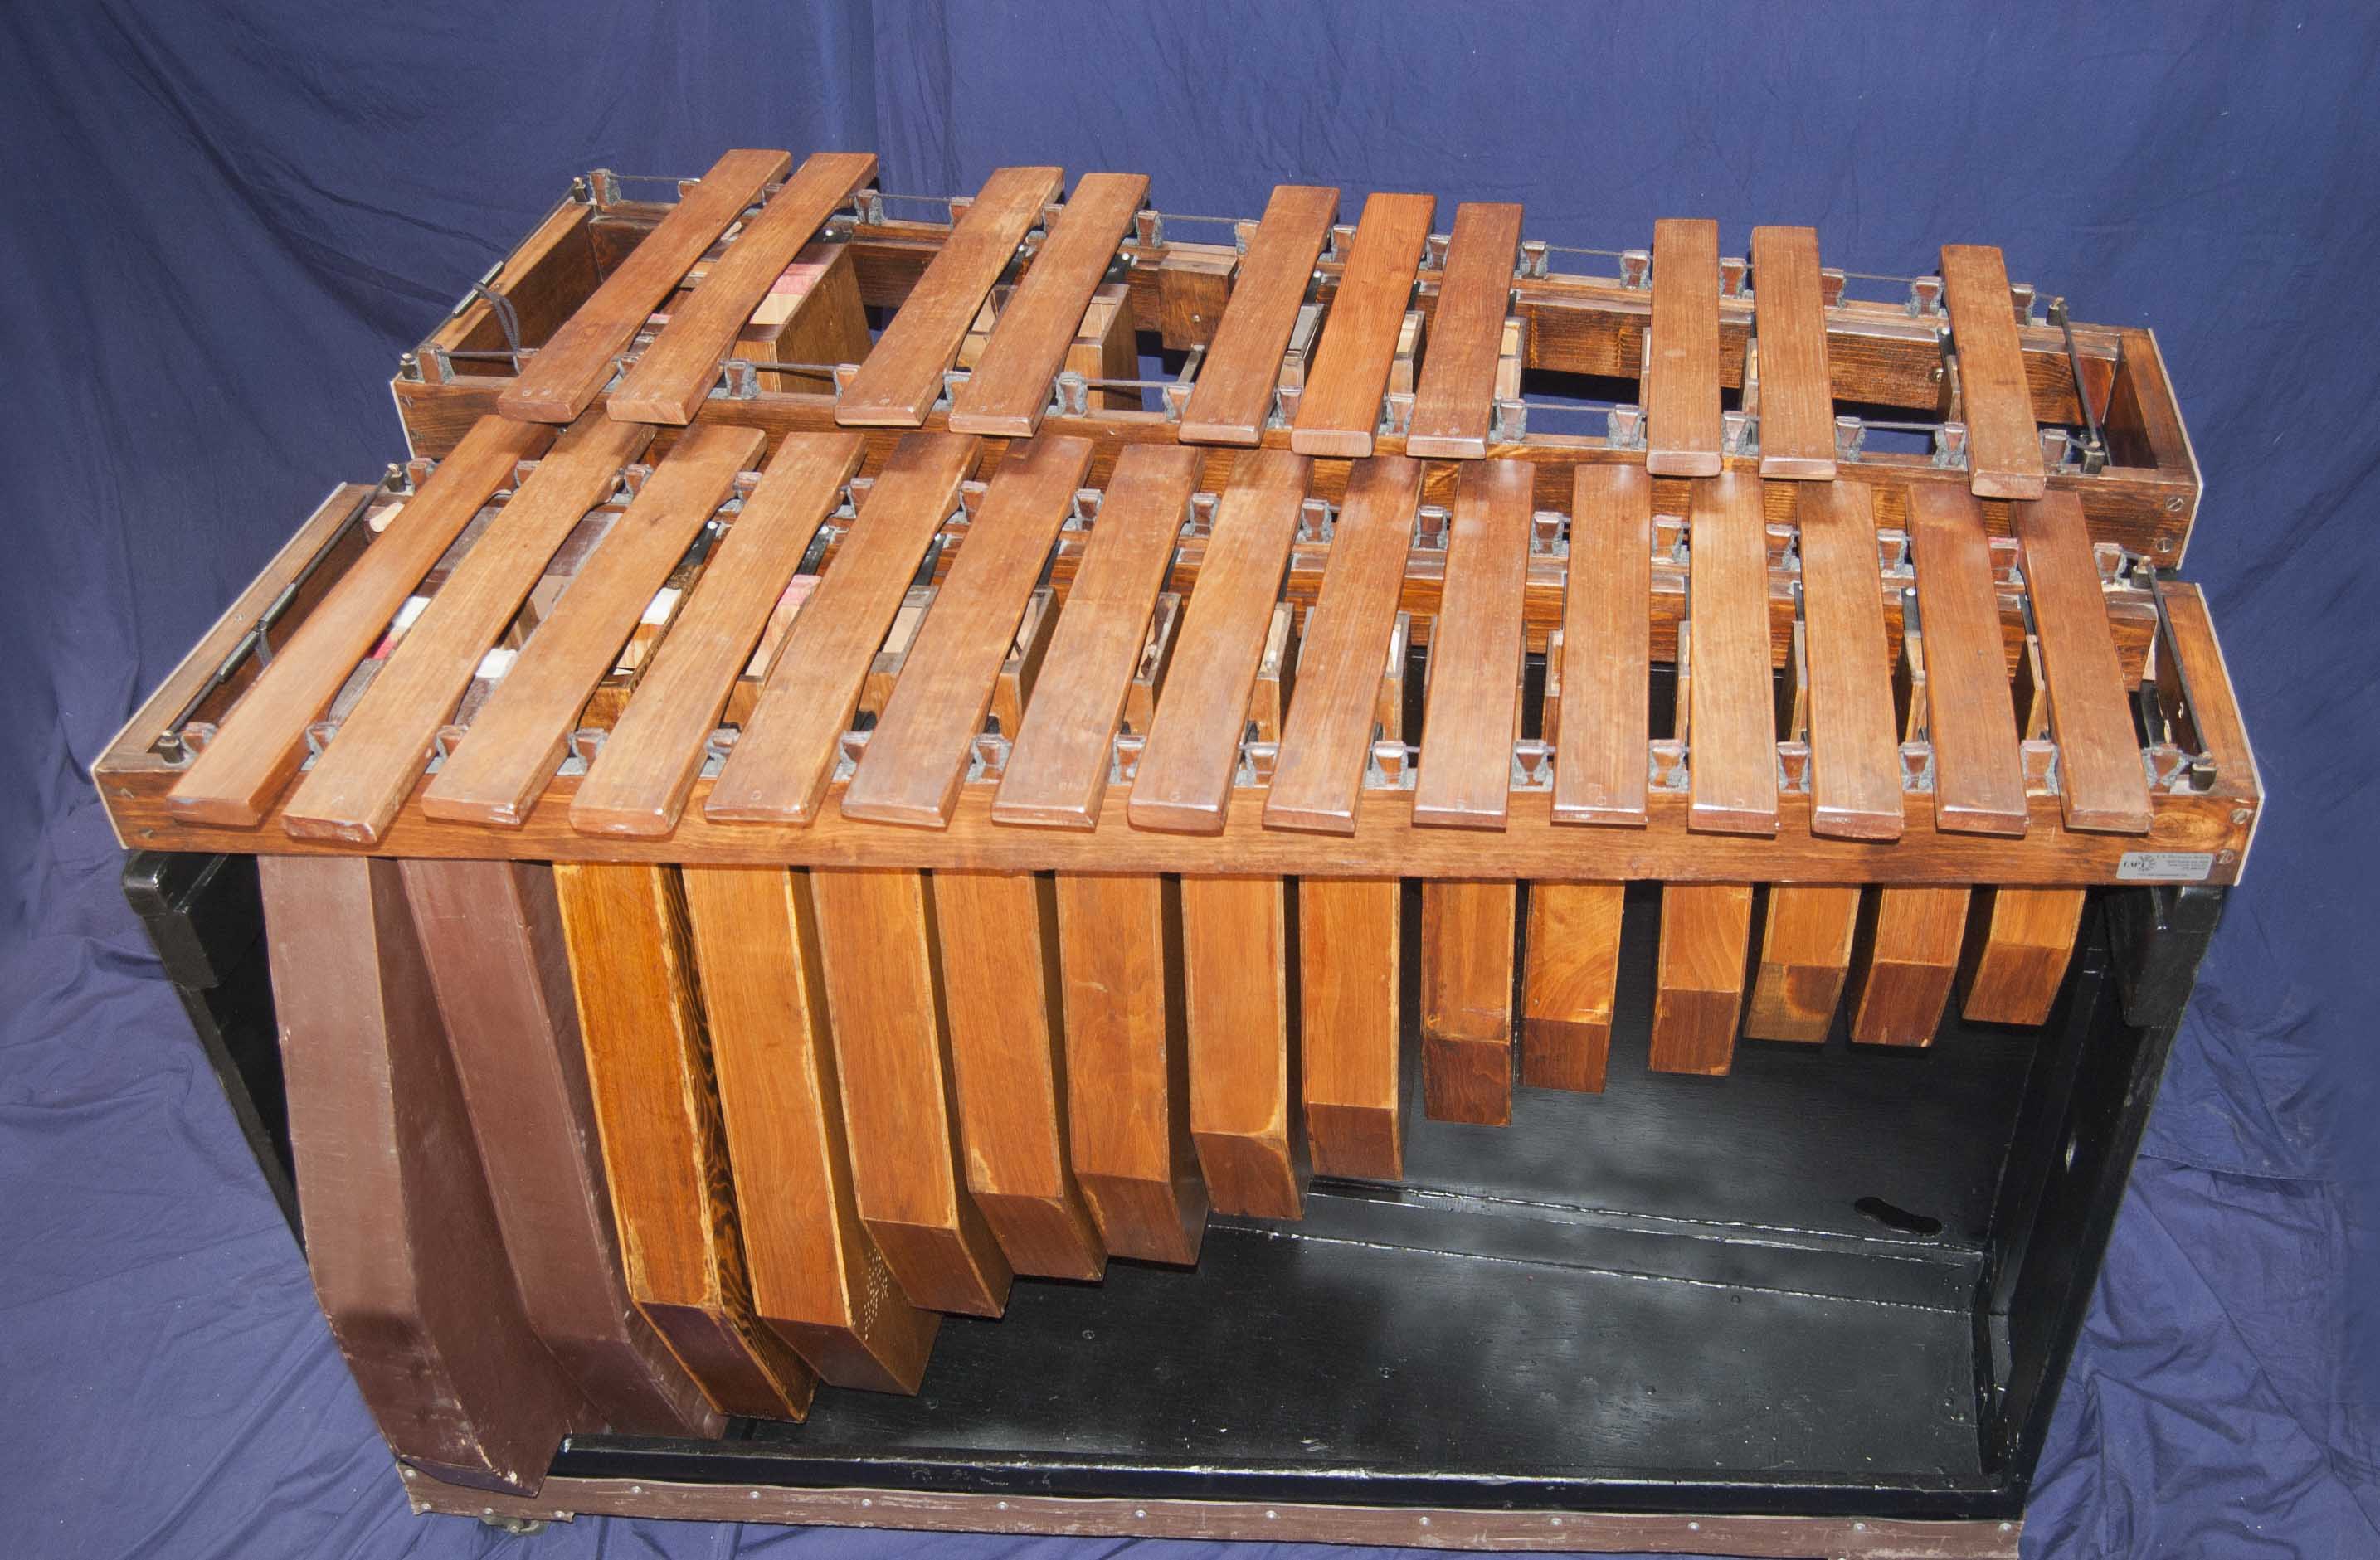 Contra Bass Marimba made of wood with two levels, one for whole tones and one for half tones.